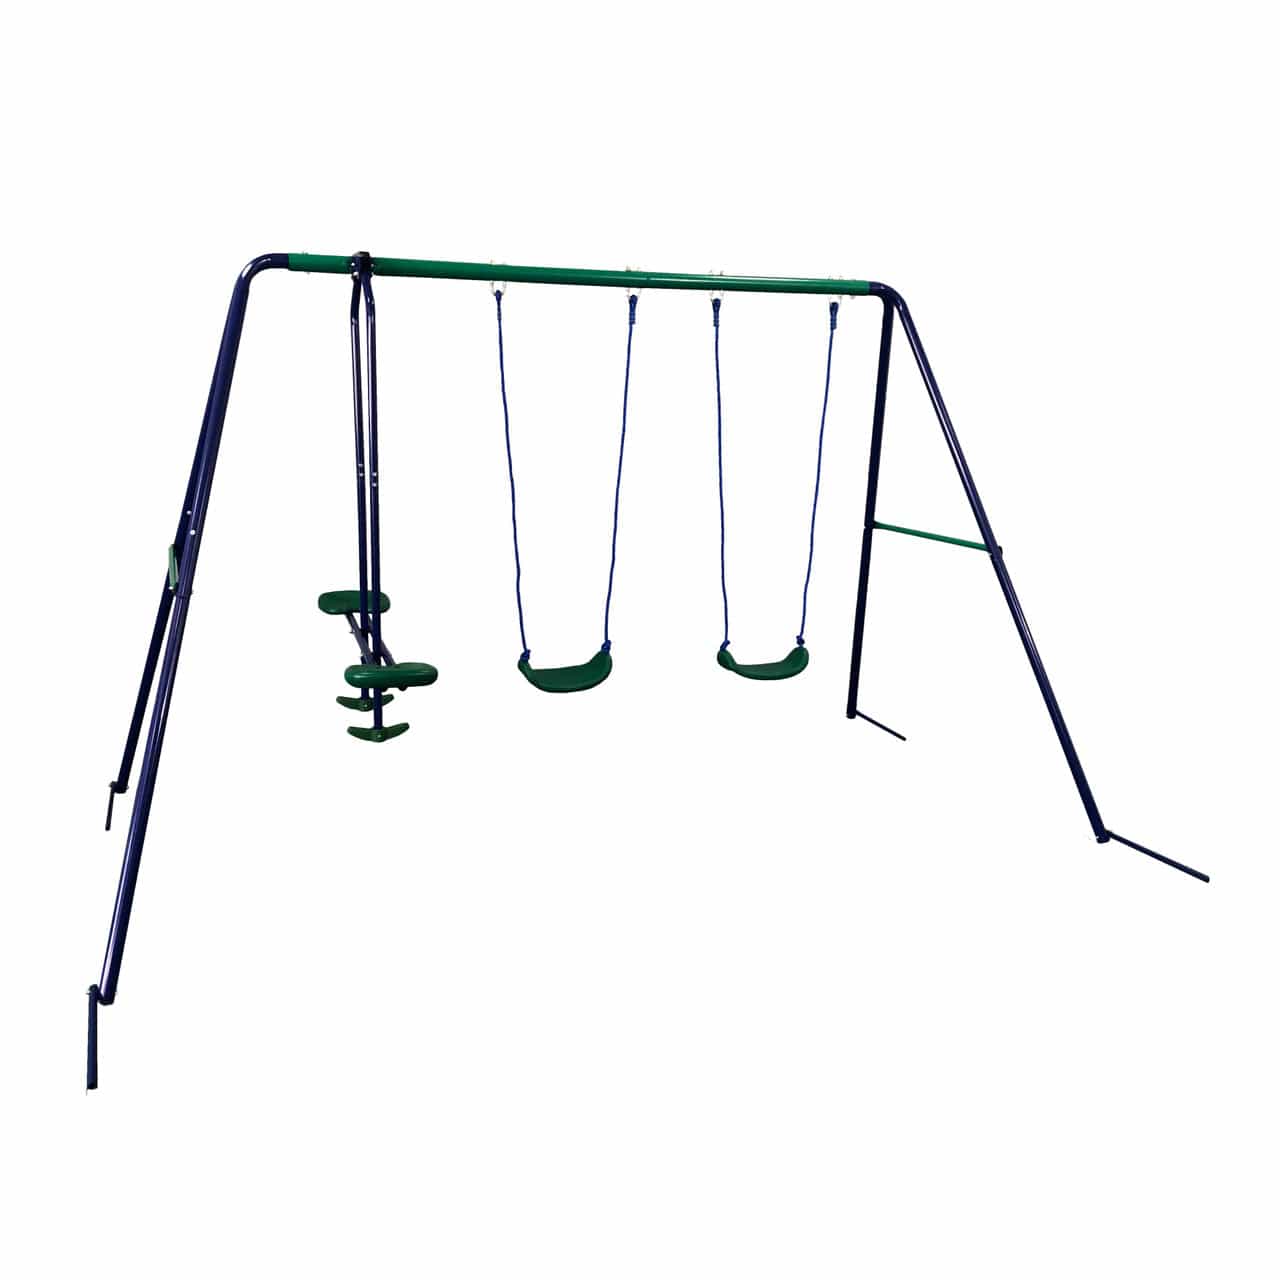 Aleko Outdoor Sturdy Child Swing Set with 2 Swings and 1 Glider - Blue and Green